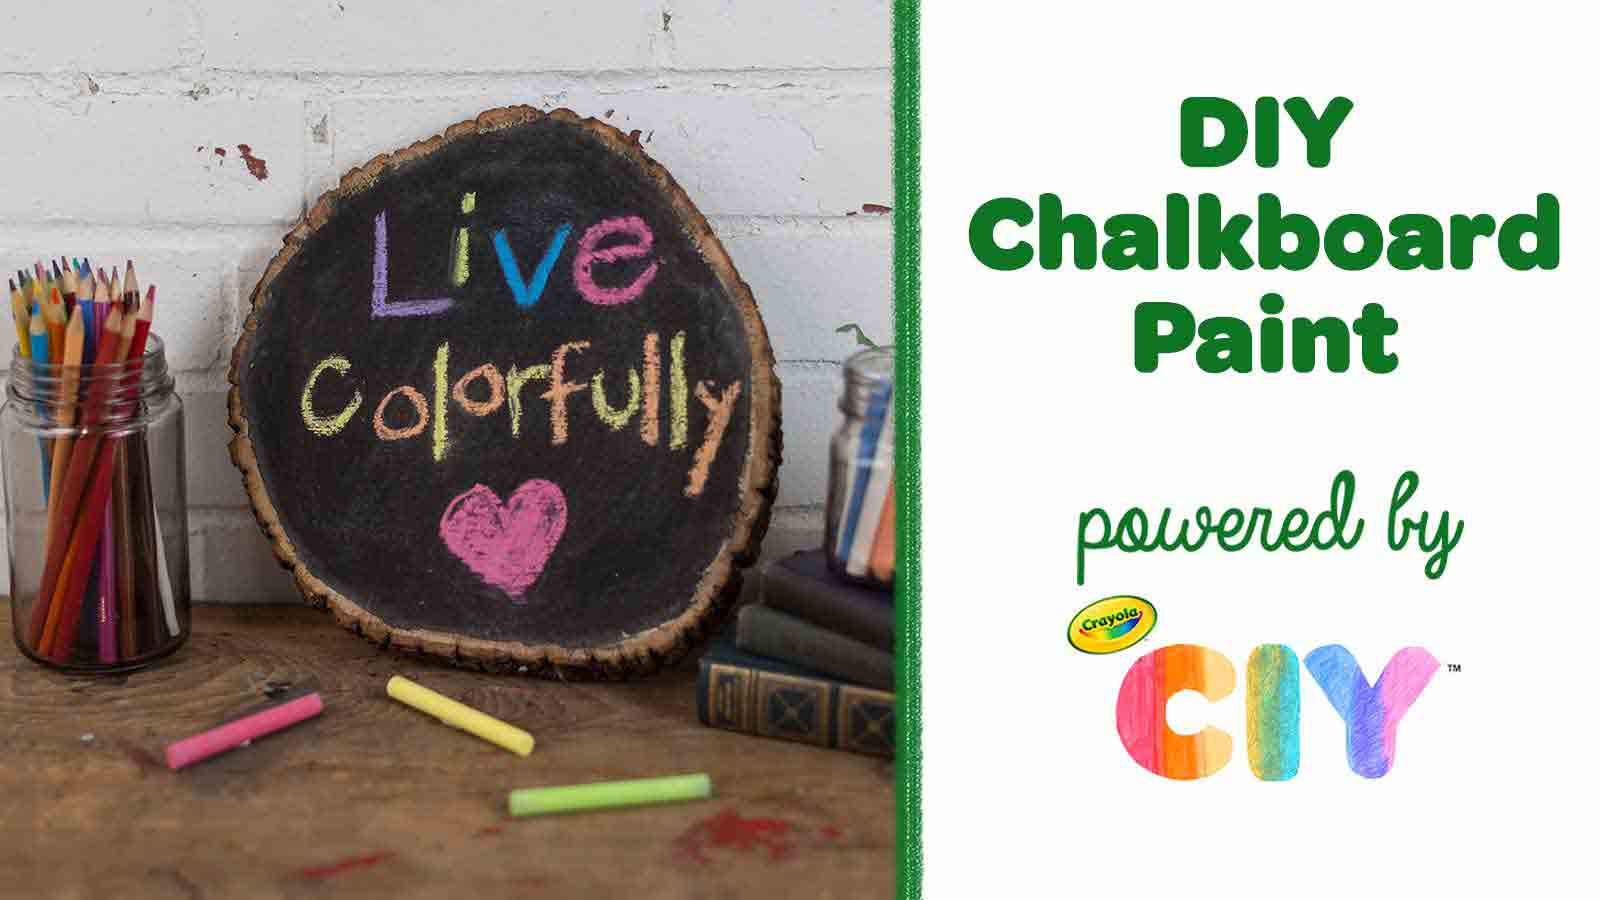 DIY Chalkboard Paint, Crafts, , Crayola CIY, DIY Crafts for  Kids and Adults